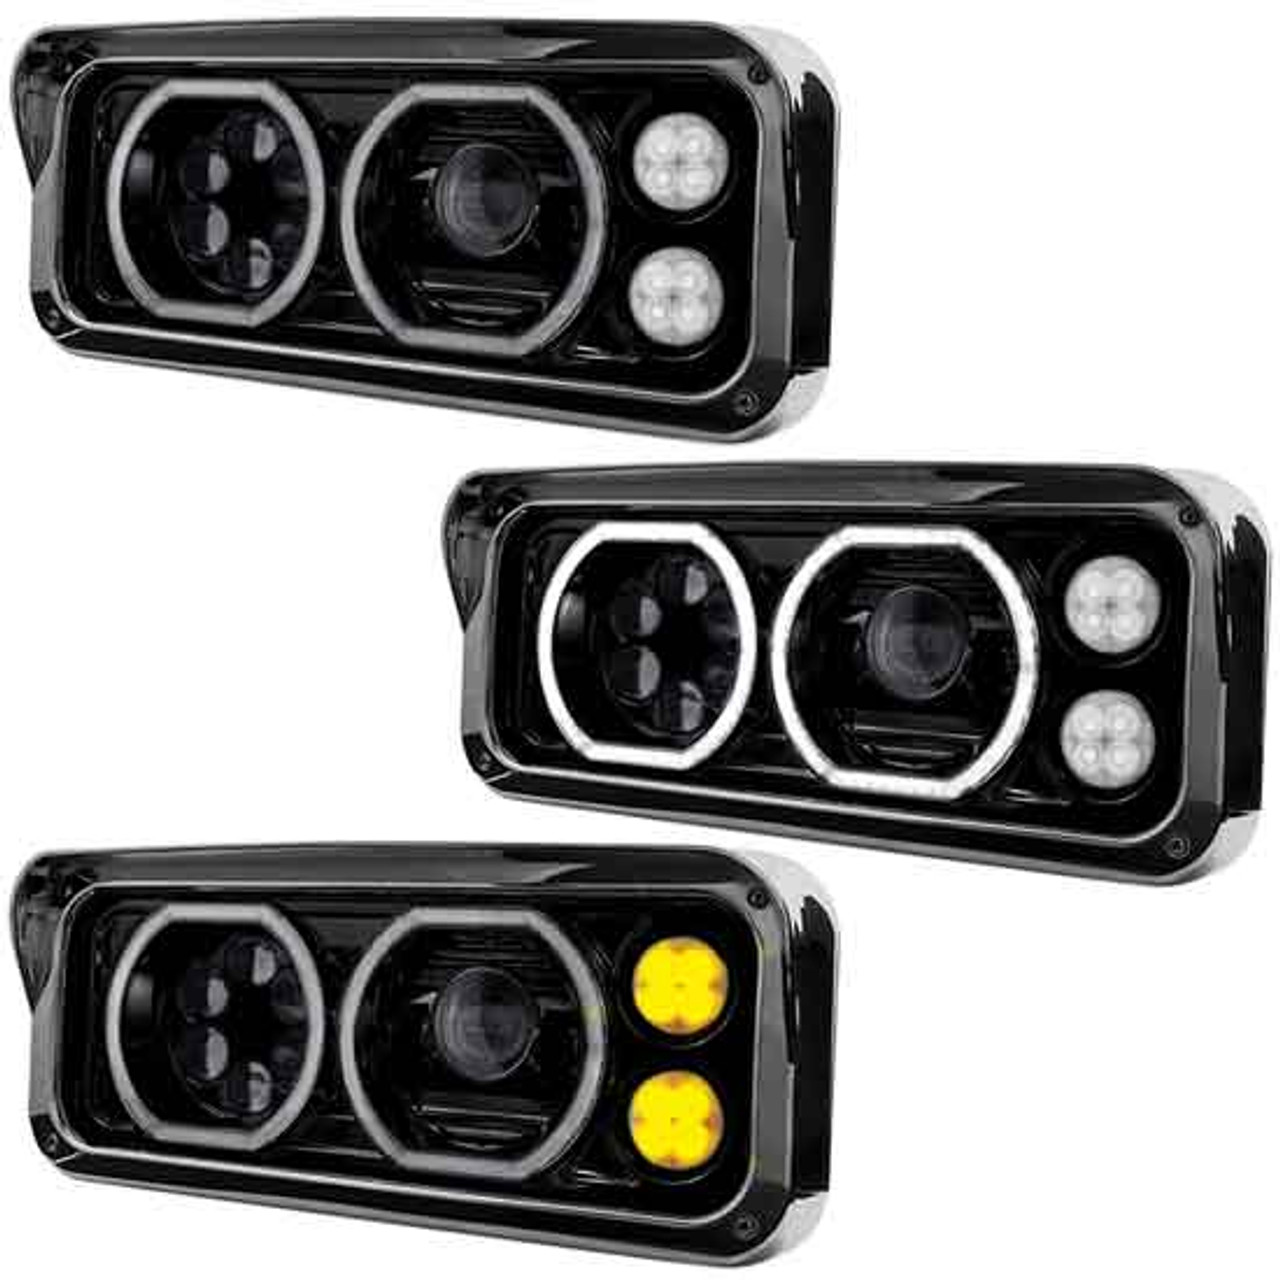 Blackout Dual Square LED Projection Headlight With Auxiliary Halo Rings   Amber LED Turn Signal State Trucks